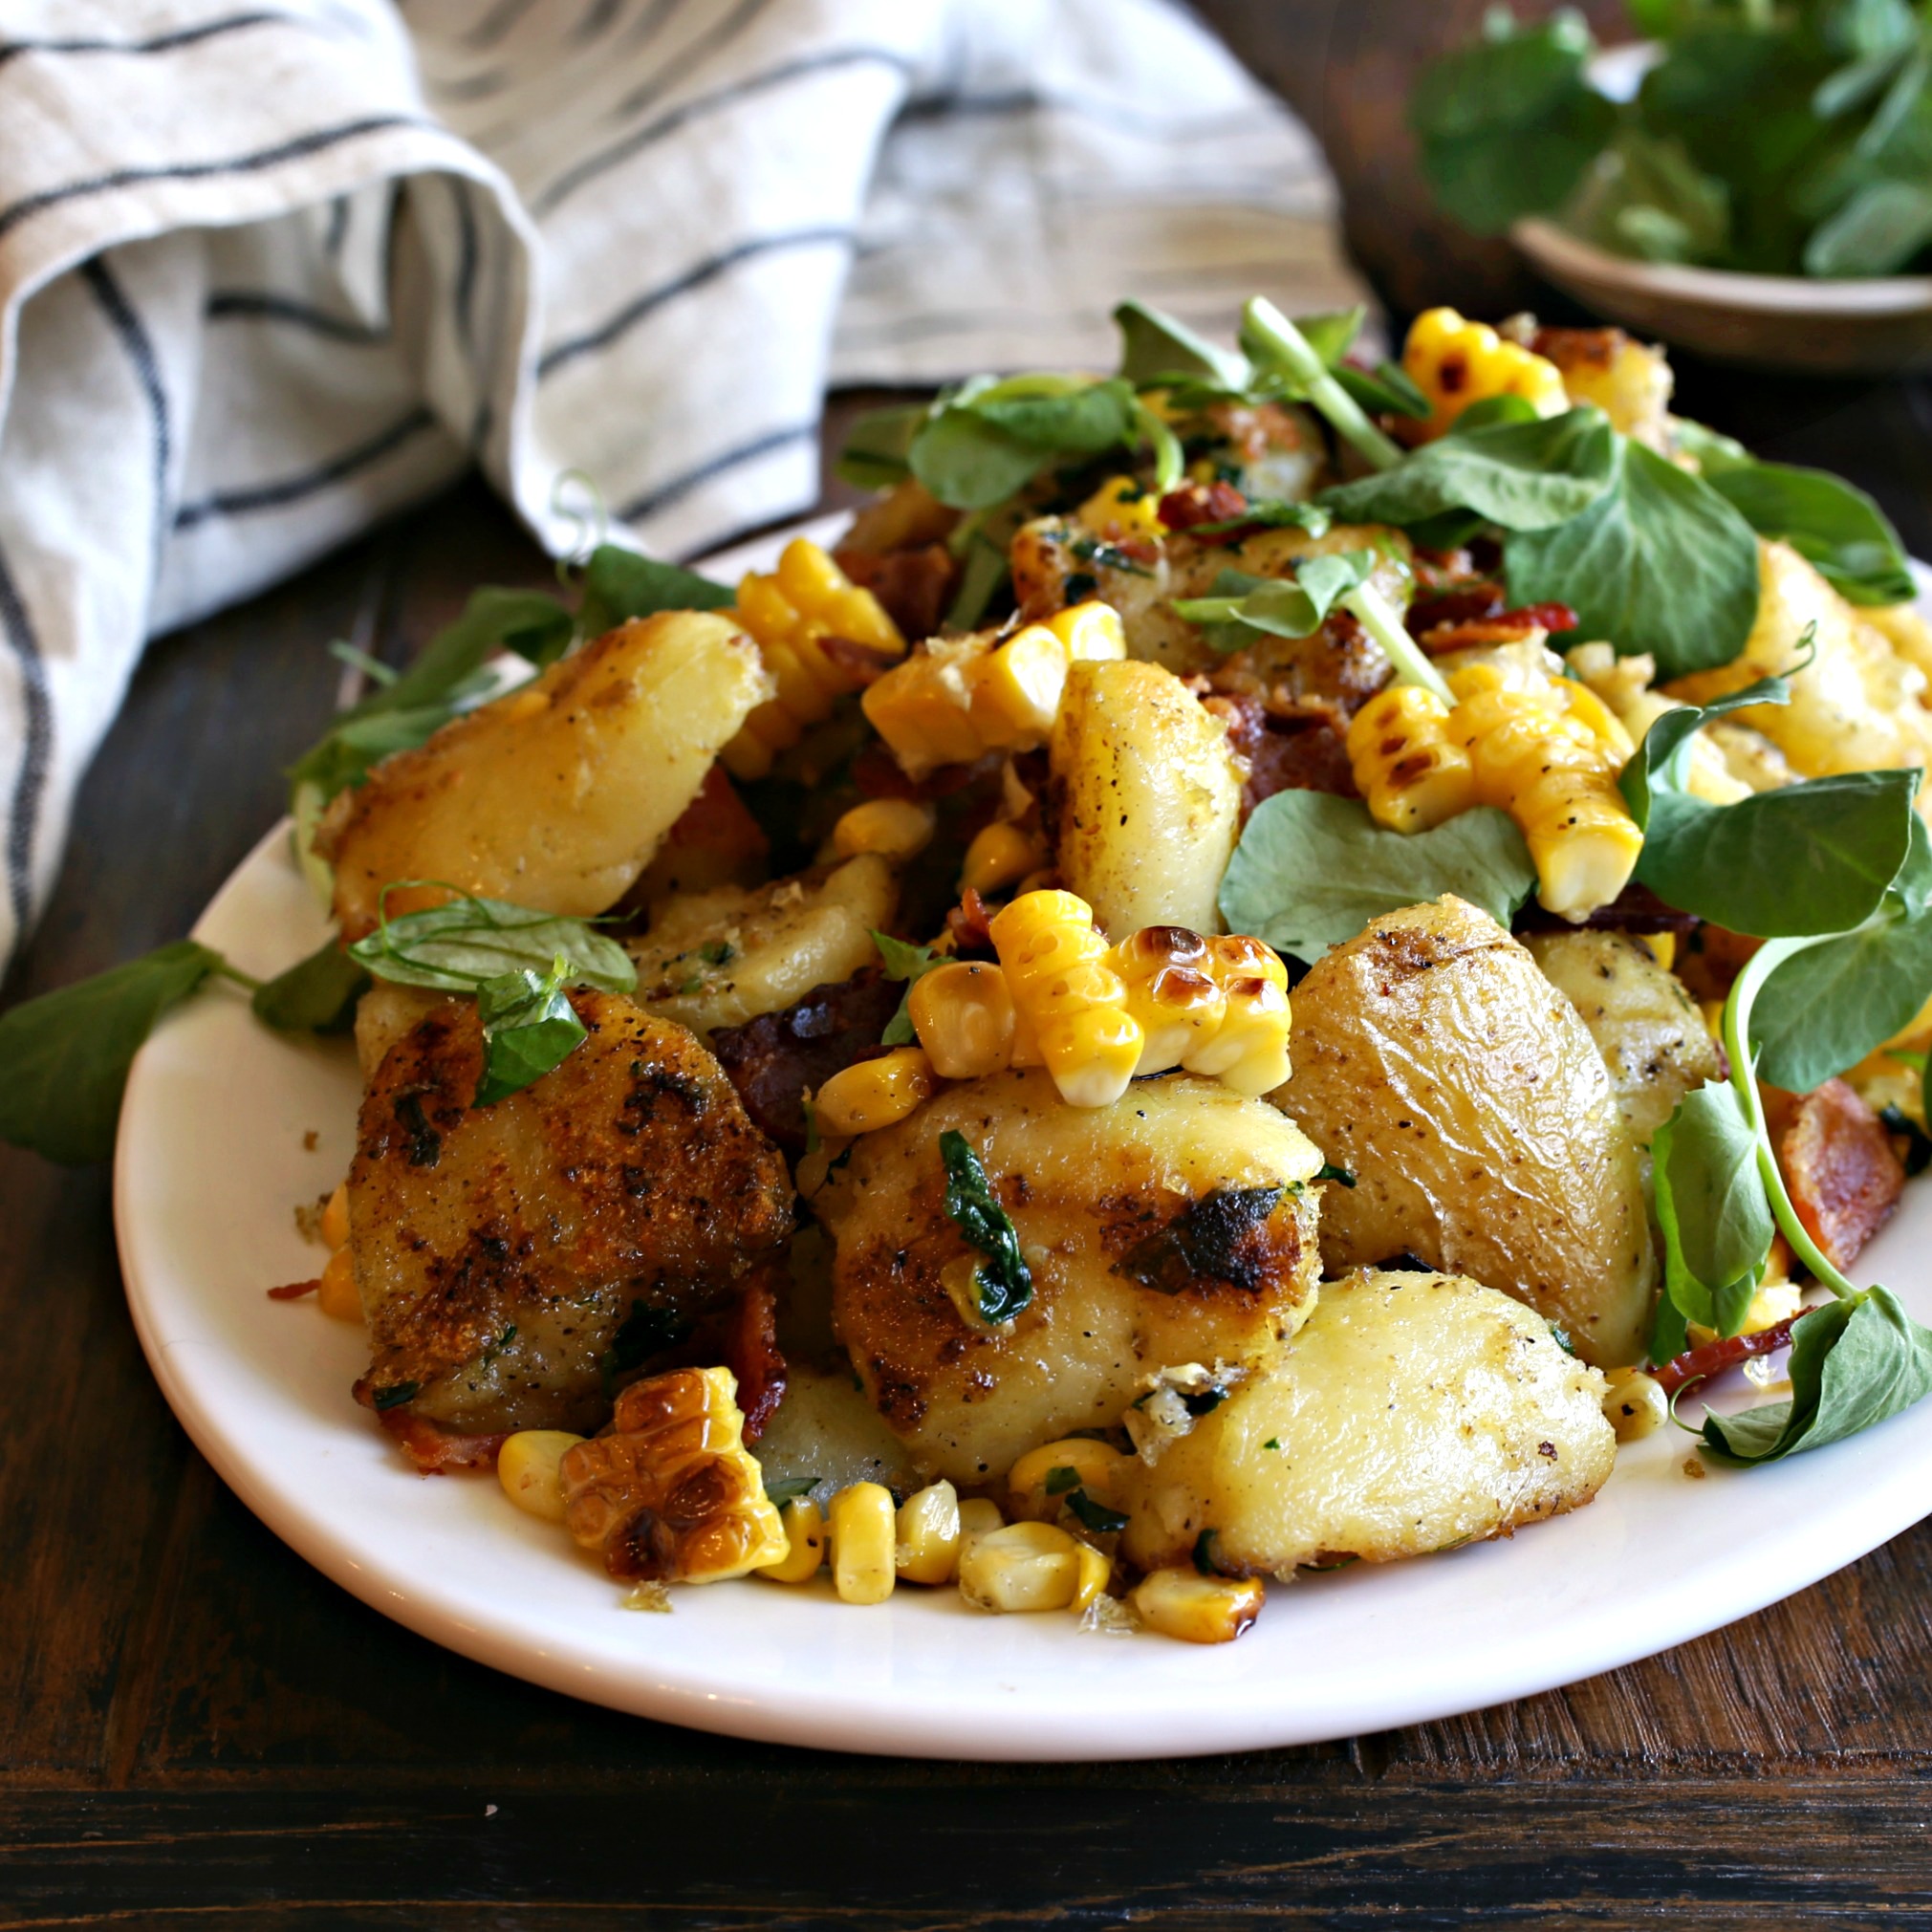 Recipe for a roasted potato salad with corn, bacon and an olive oil dressing.